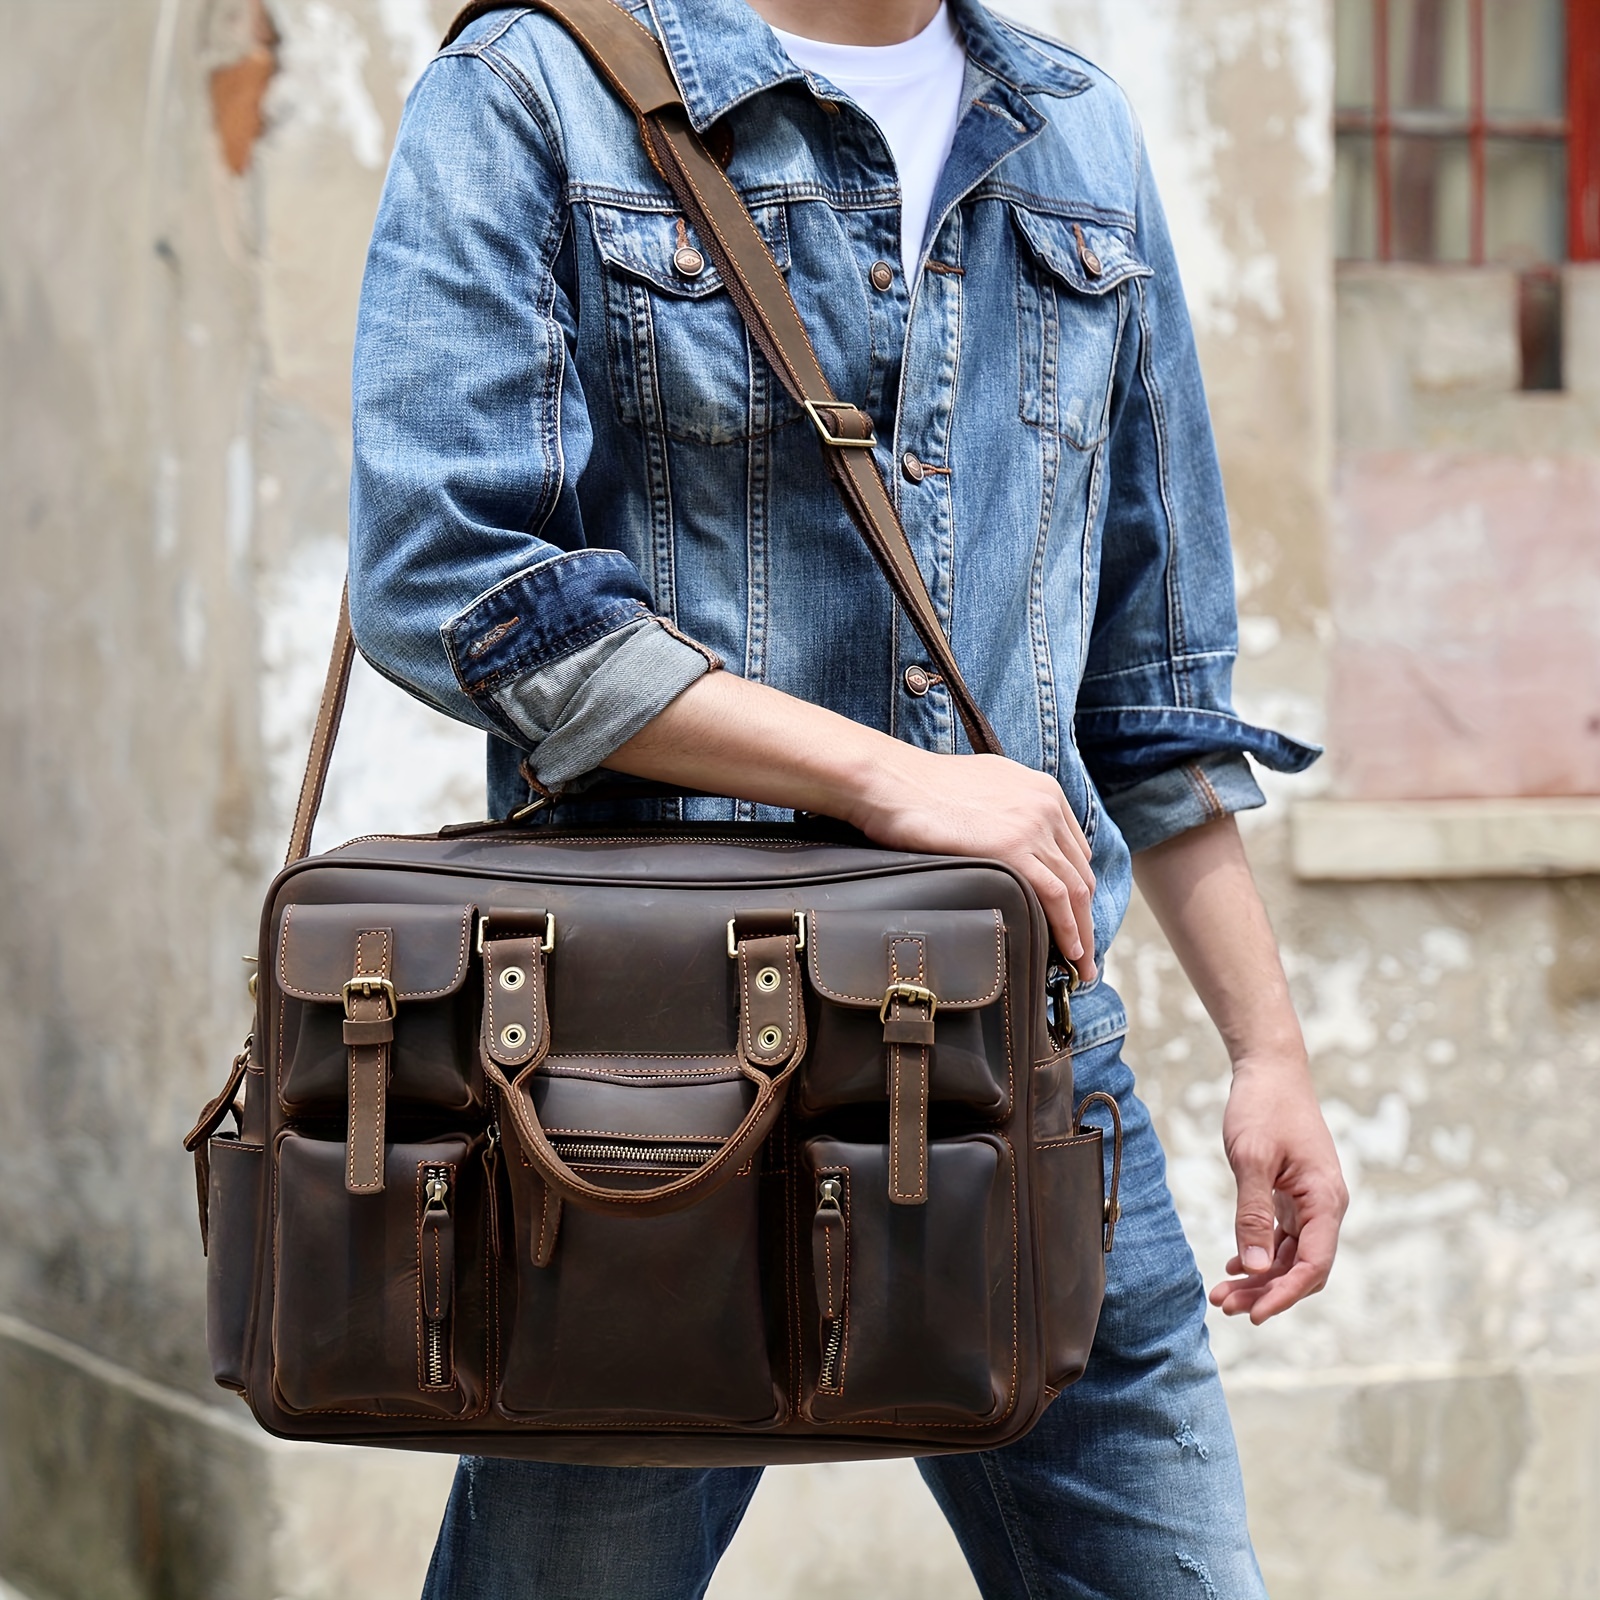 1pc Vintage Crossbody Briefcase Bag With Multiple Compartments & Laptop Sleeve For Business Trips & Traveling, Work Bags For Men\\u002FWomen,